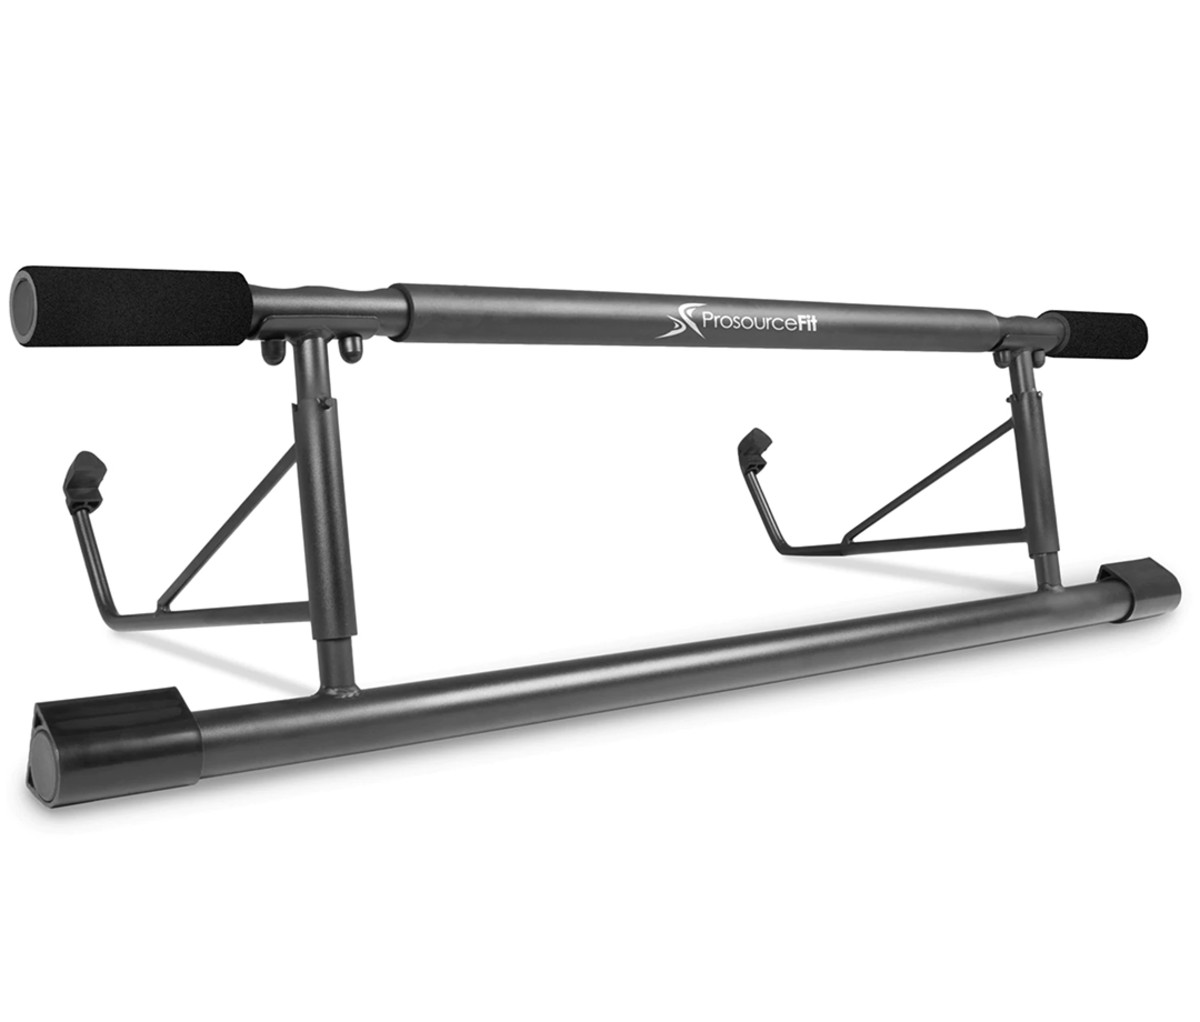 Foldable Doorway Pull-up Bar